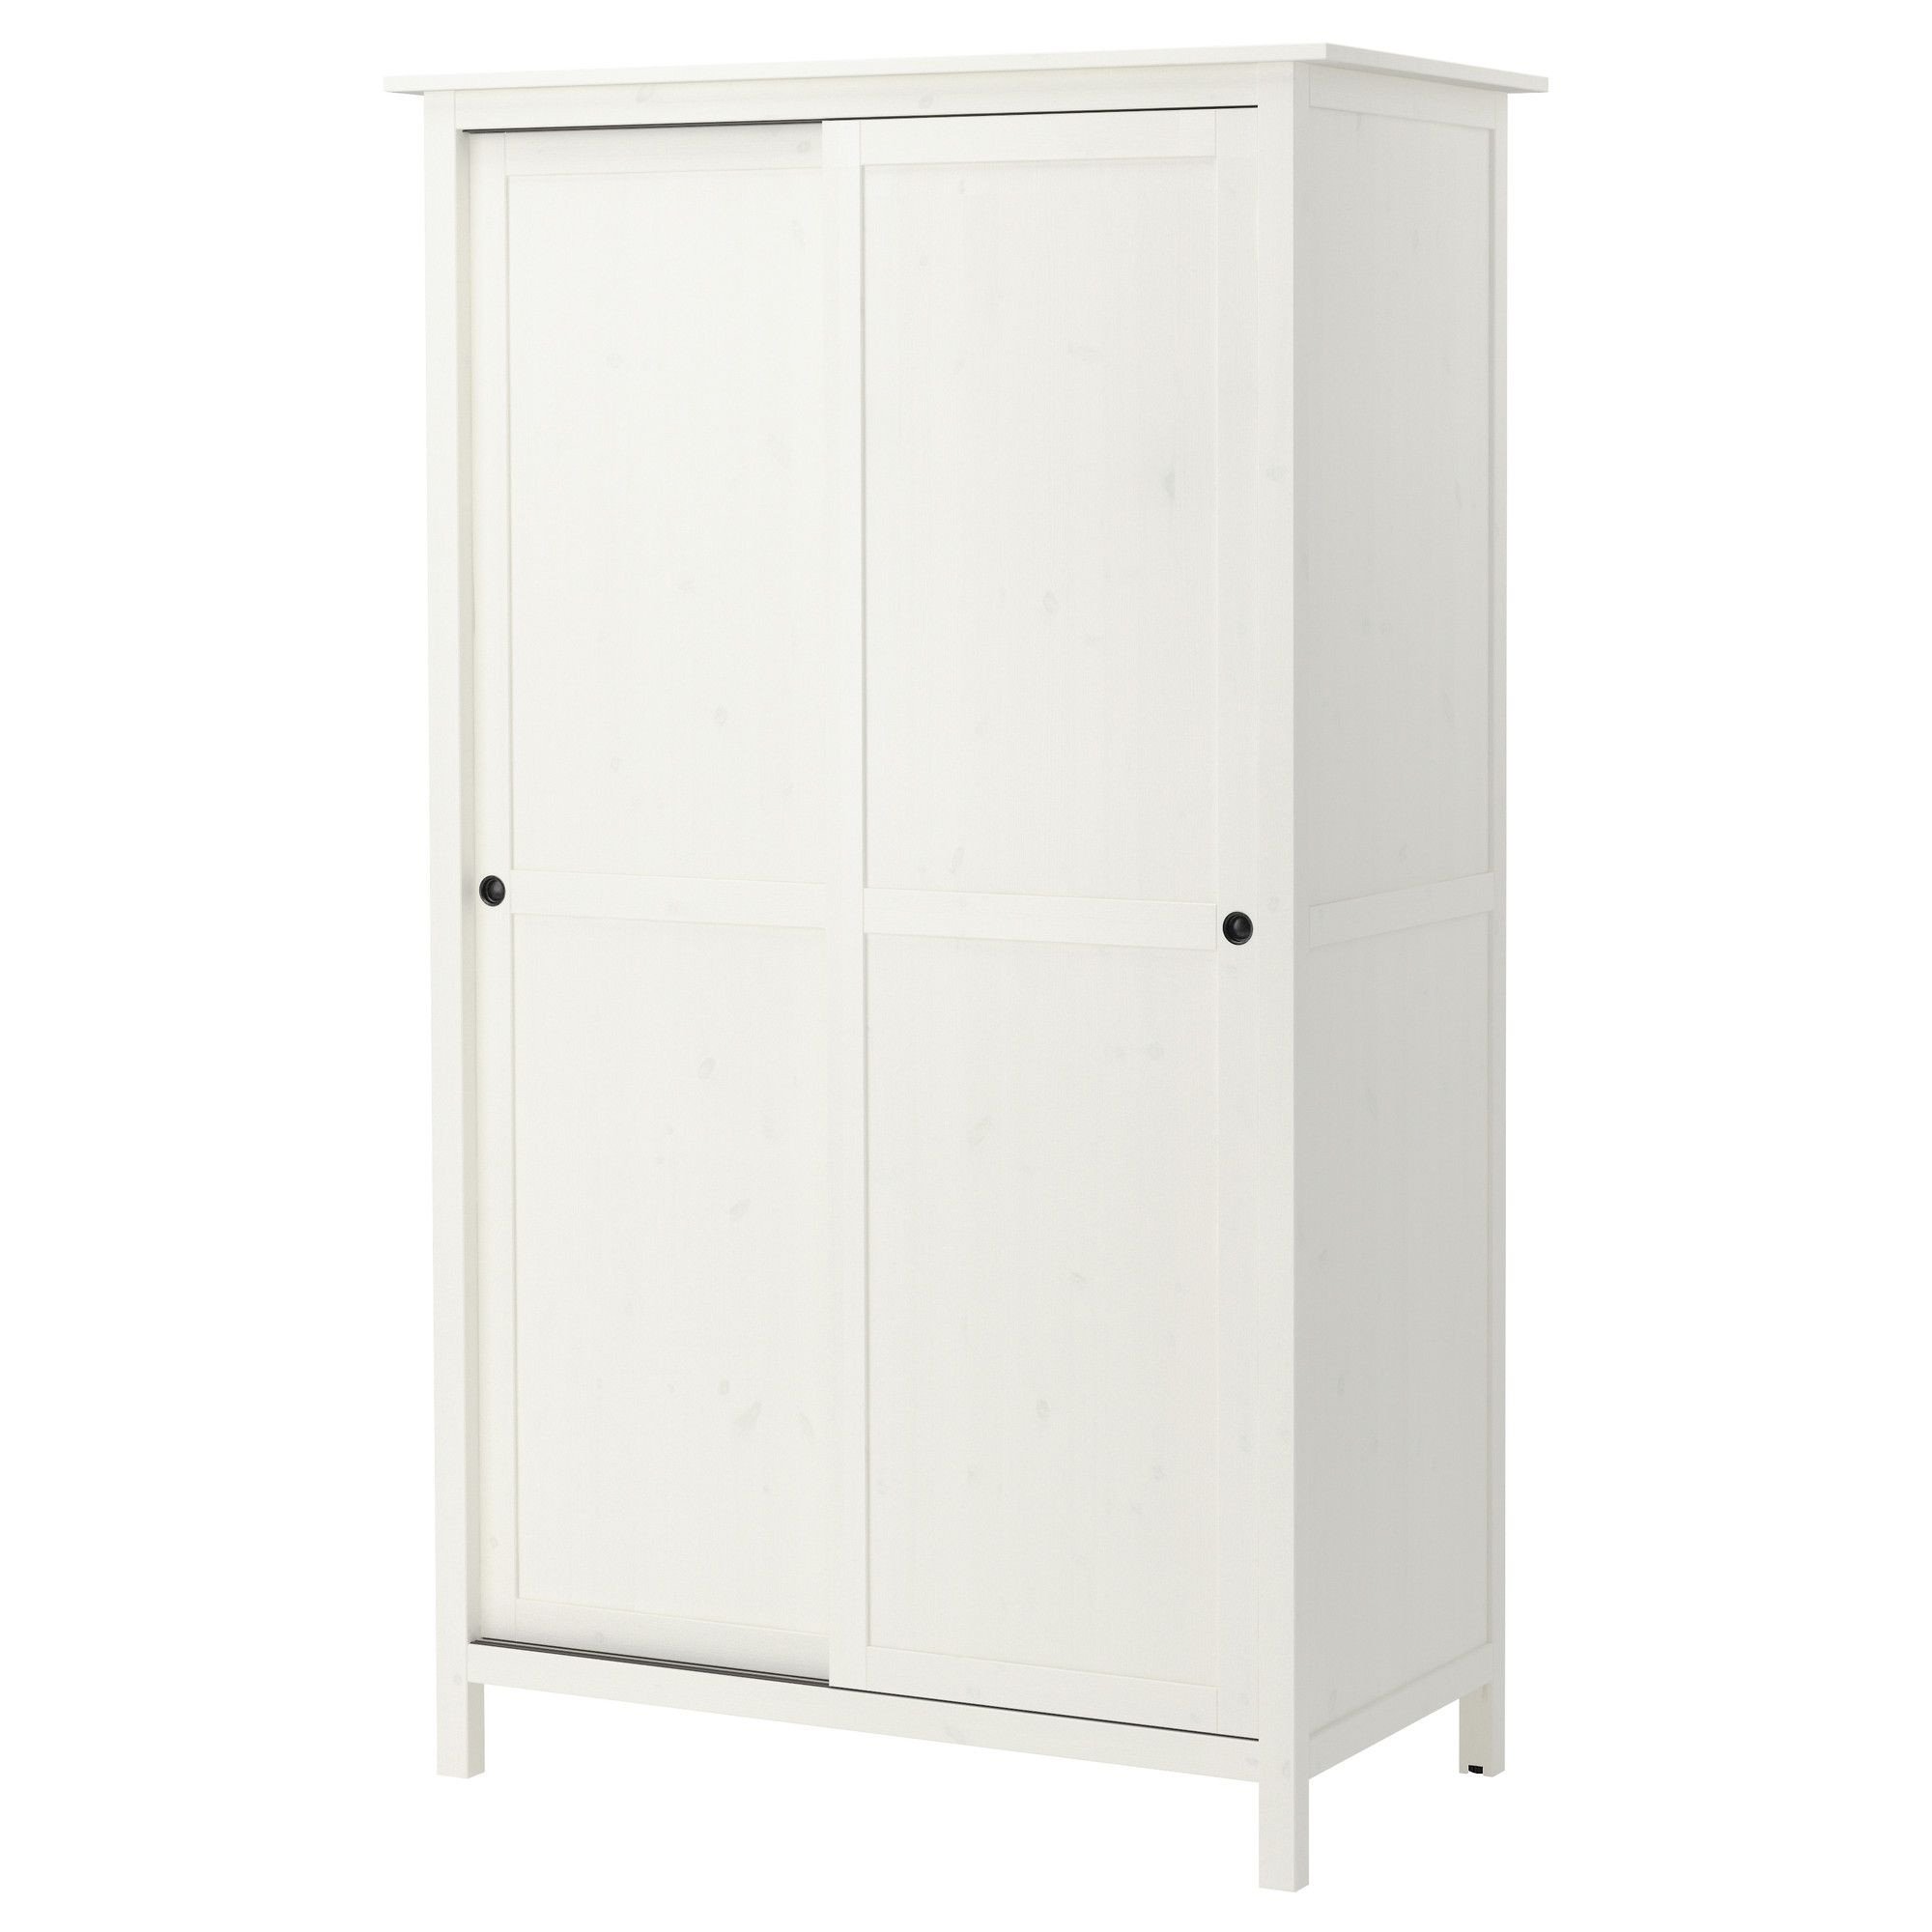 Ikea Bedroom Furniture Wardrobes Unique Us Furniture and Home Furnishings